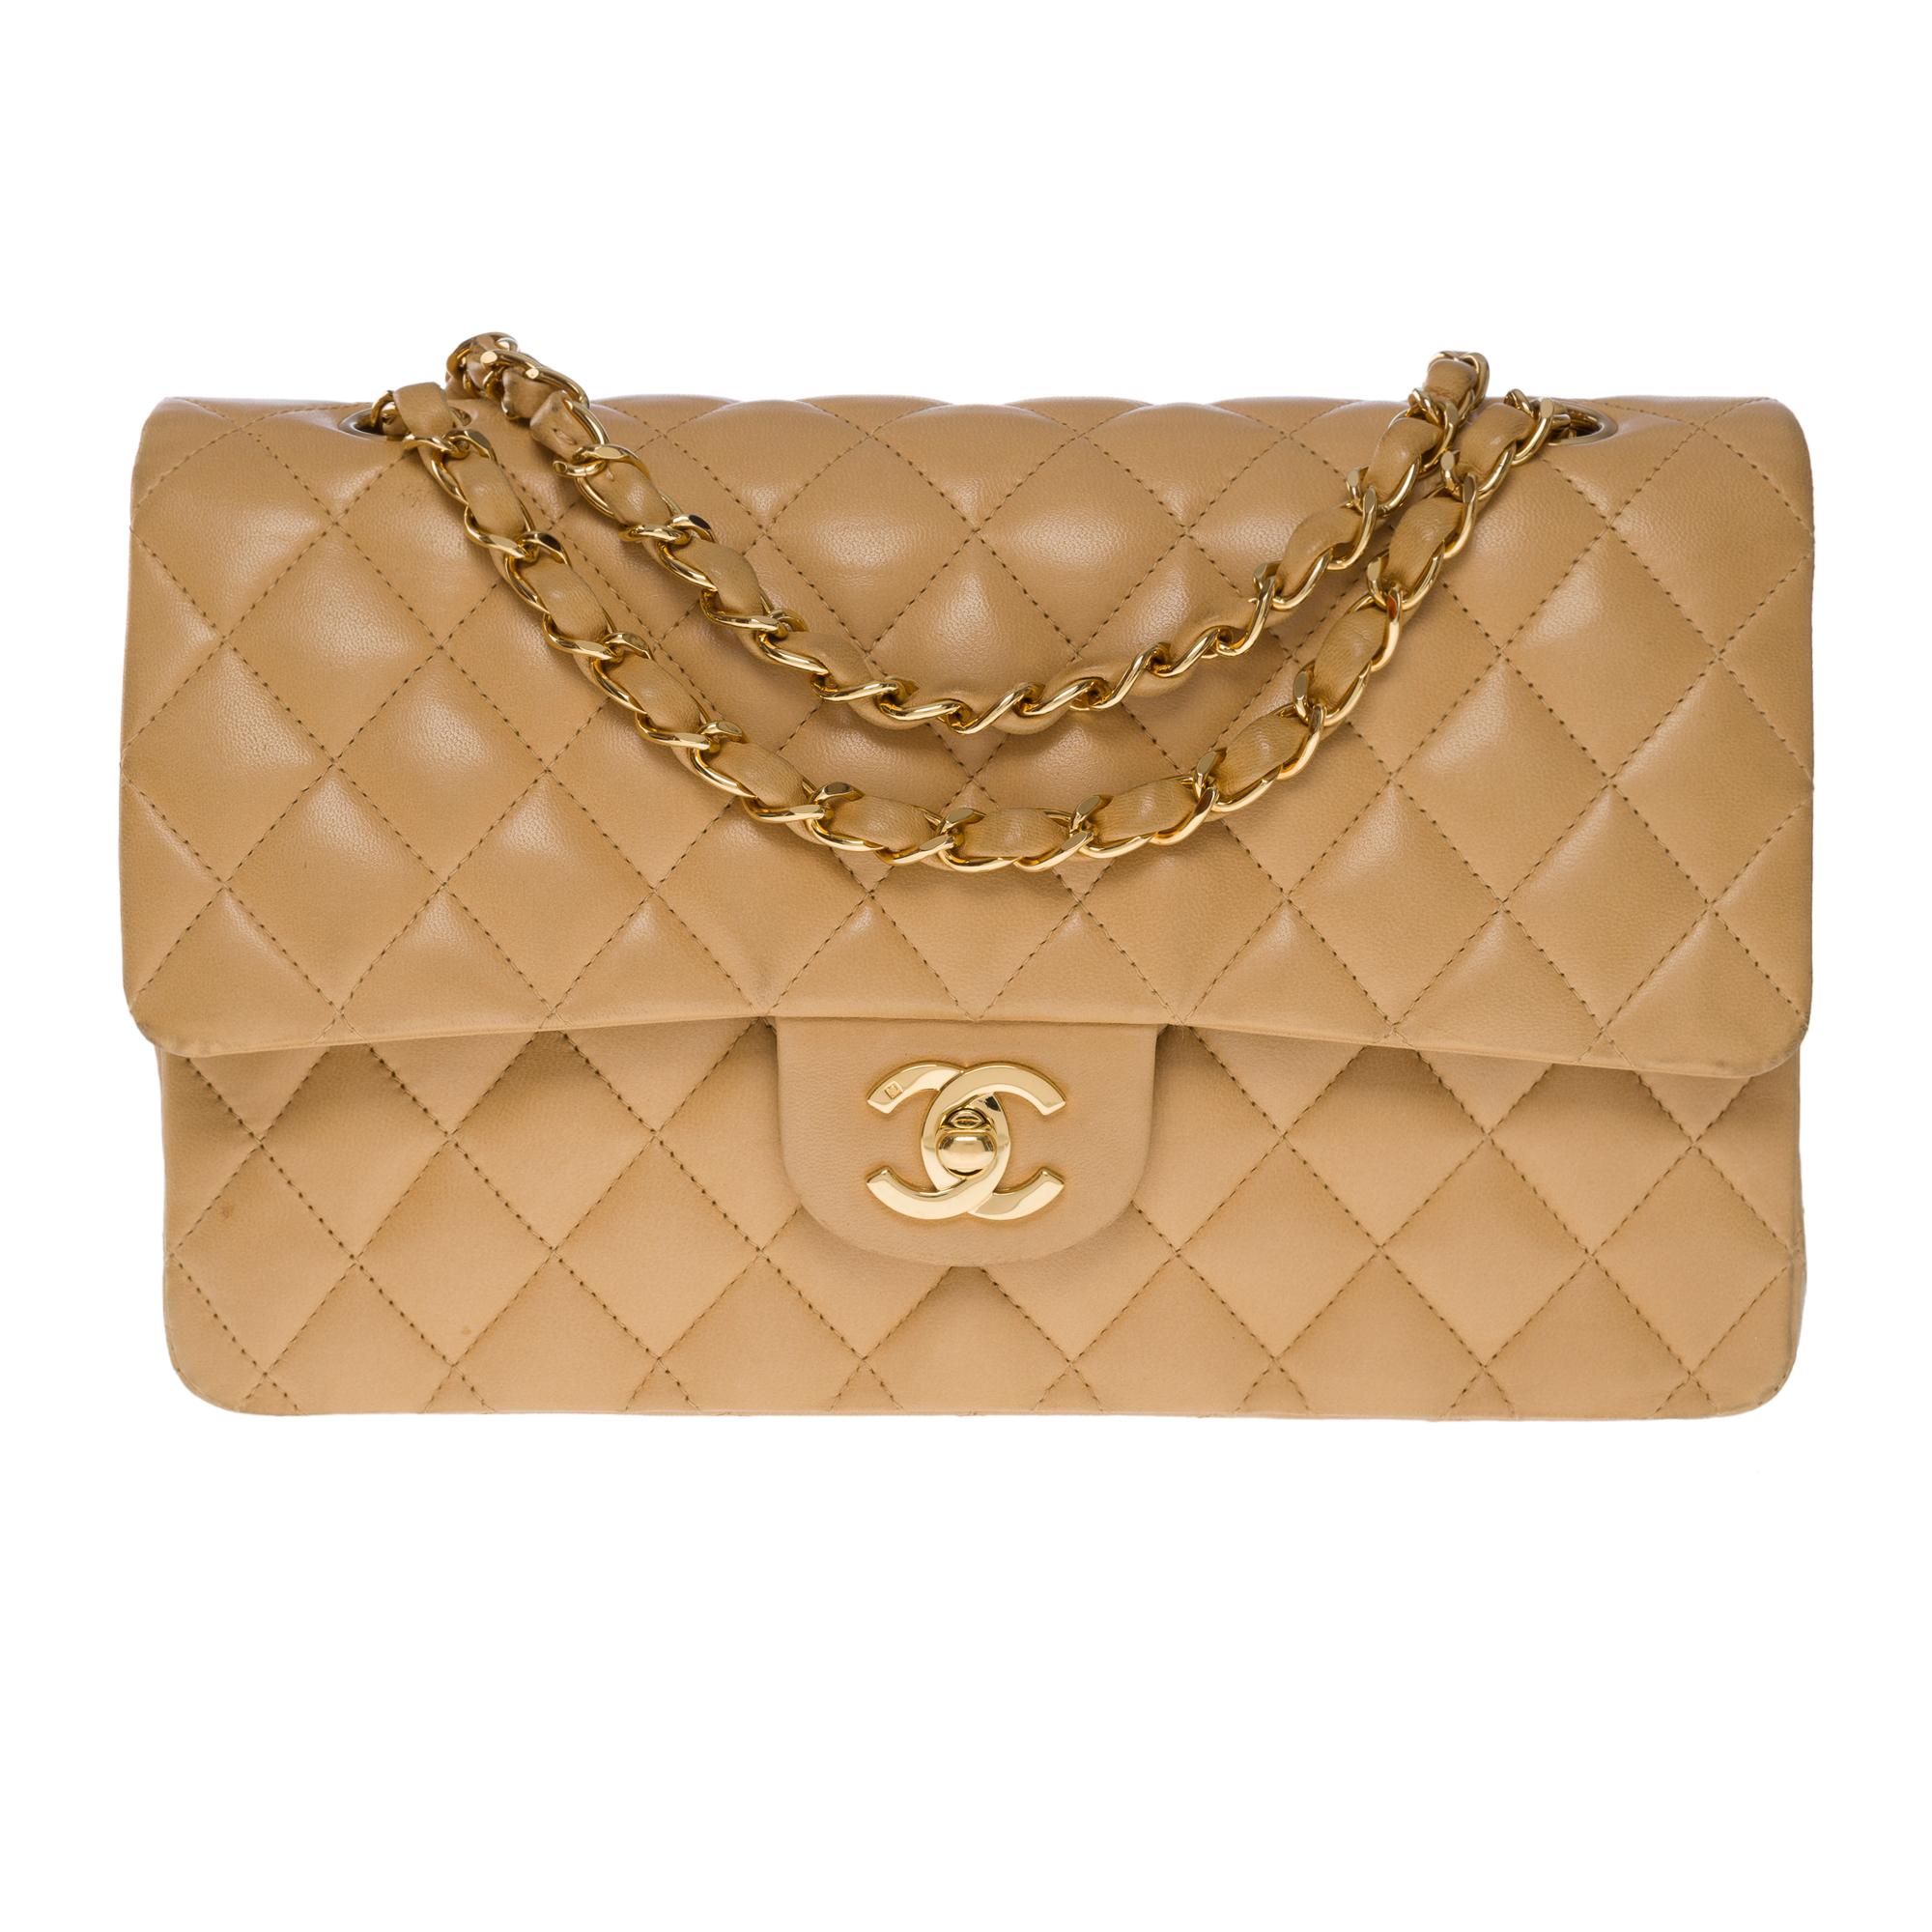 Exceptional Chanel Timeless medium double flap shoulder bag in beige quilted lambskin leather, gold metal hardware, gold metal chain handle interwoven with beige leather for a shoulder and crossbody carry
Backpack pocket
Closure by flap, clasp